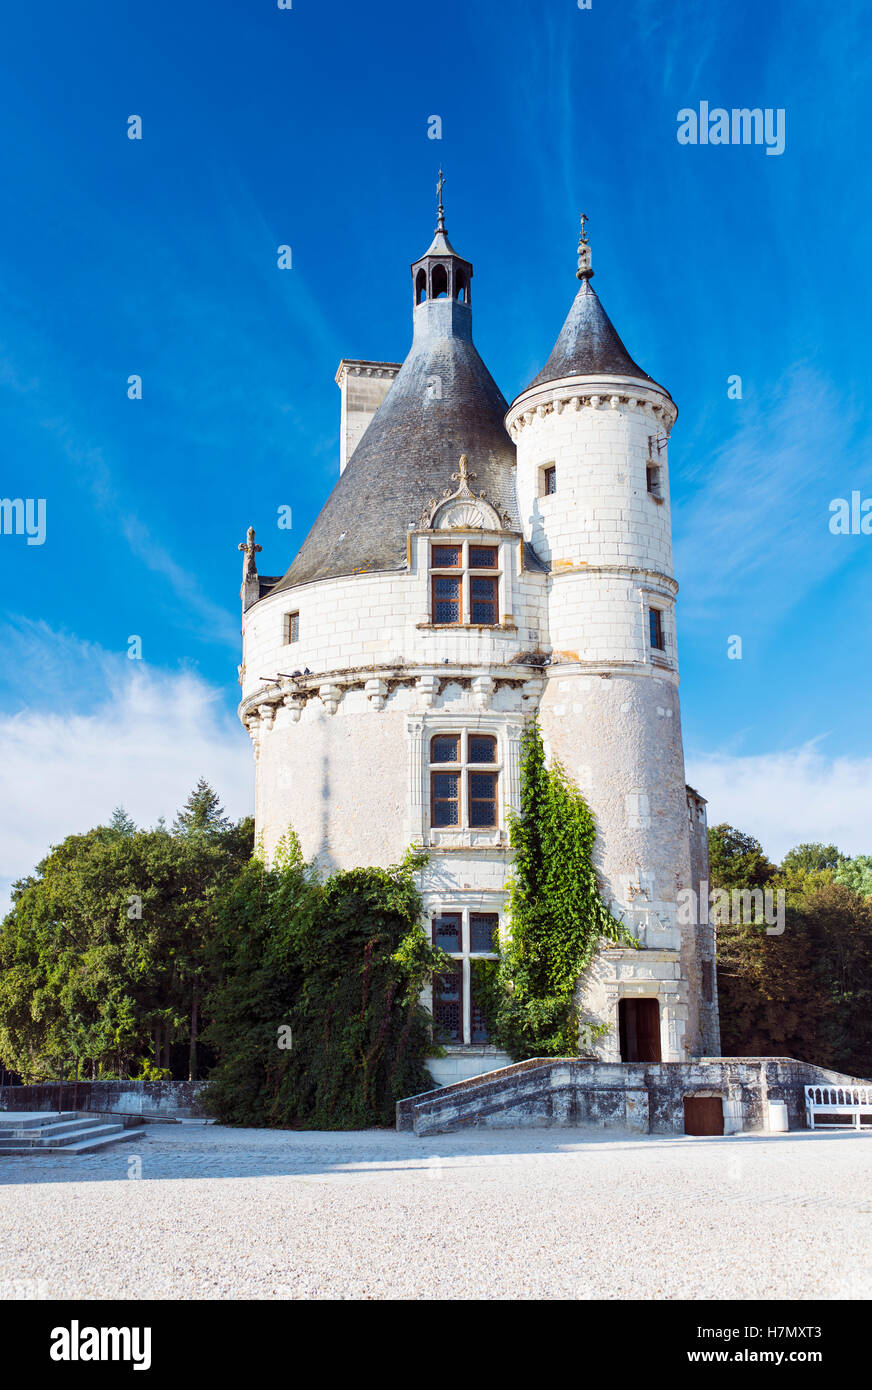 The original castle keep at Chateau de Chenonceau near the village of Chenonceaux in the Loire Valley in France Stock Photo